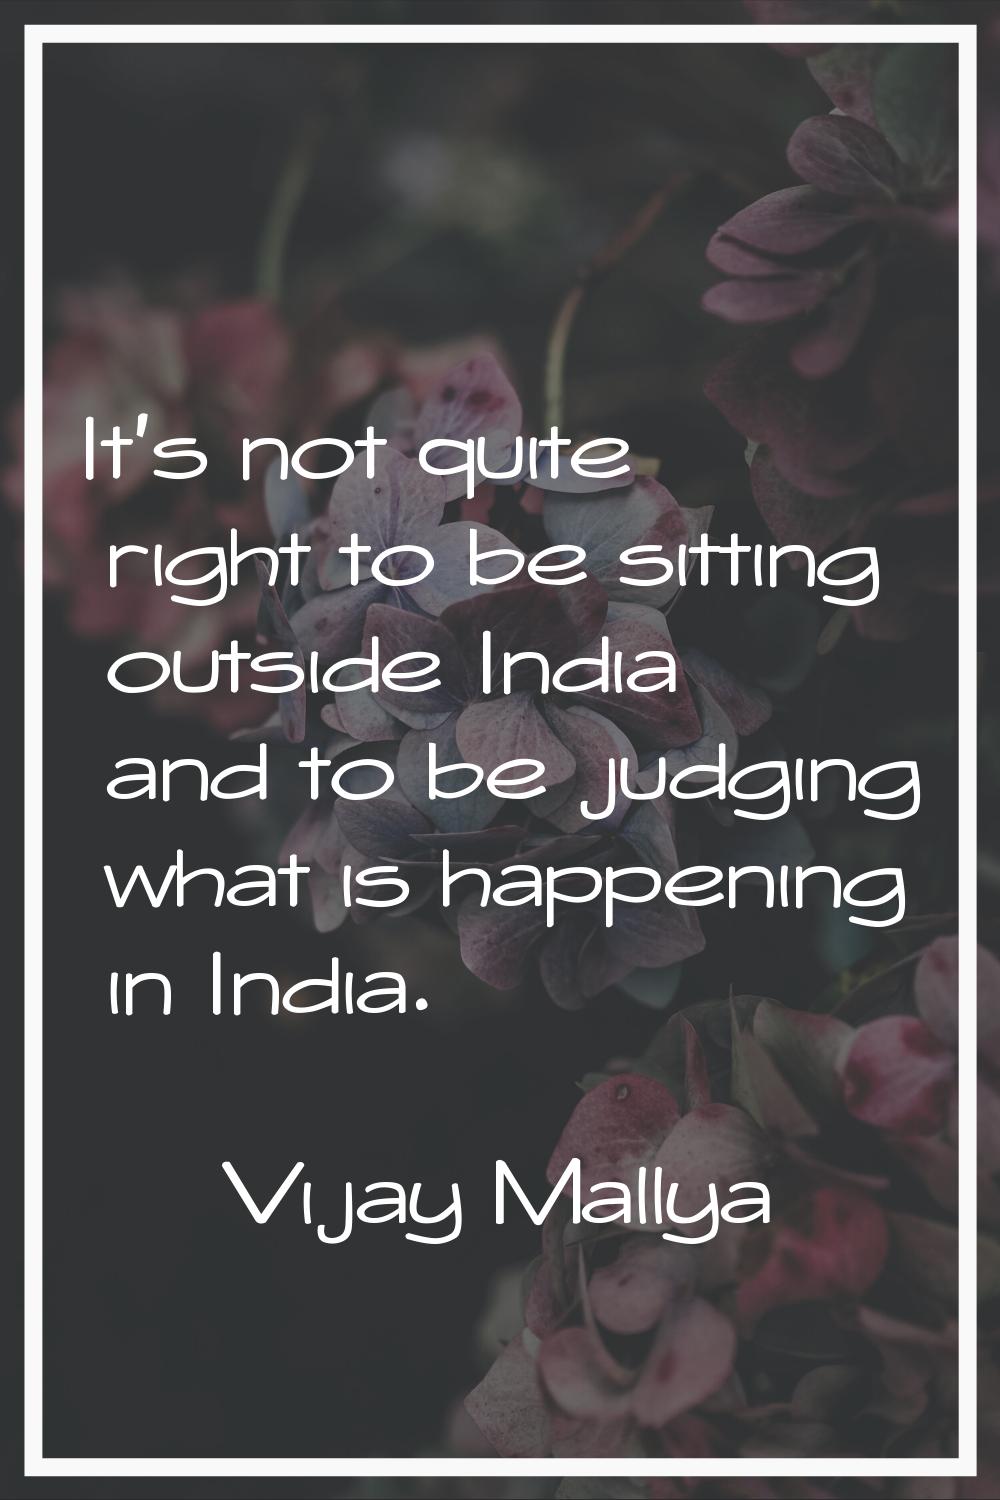 It's not quite right to be sitting outside India and to be judging what is happening in India.